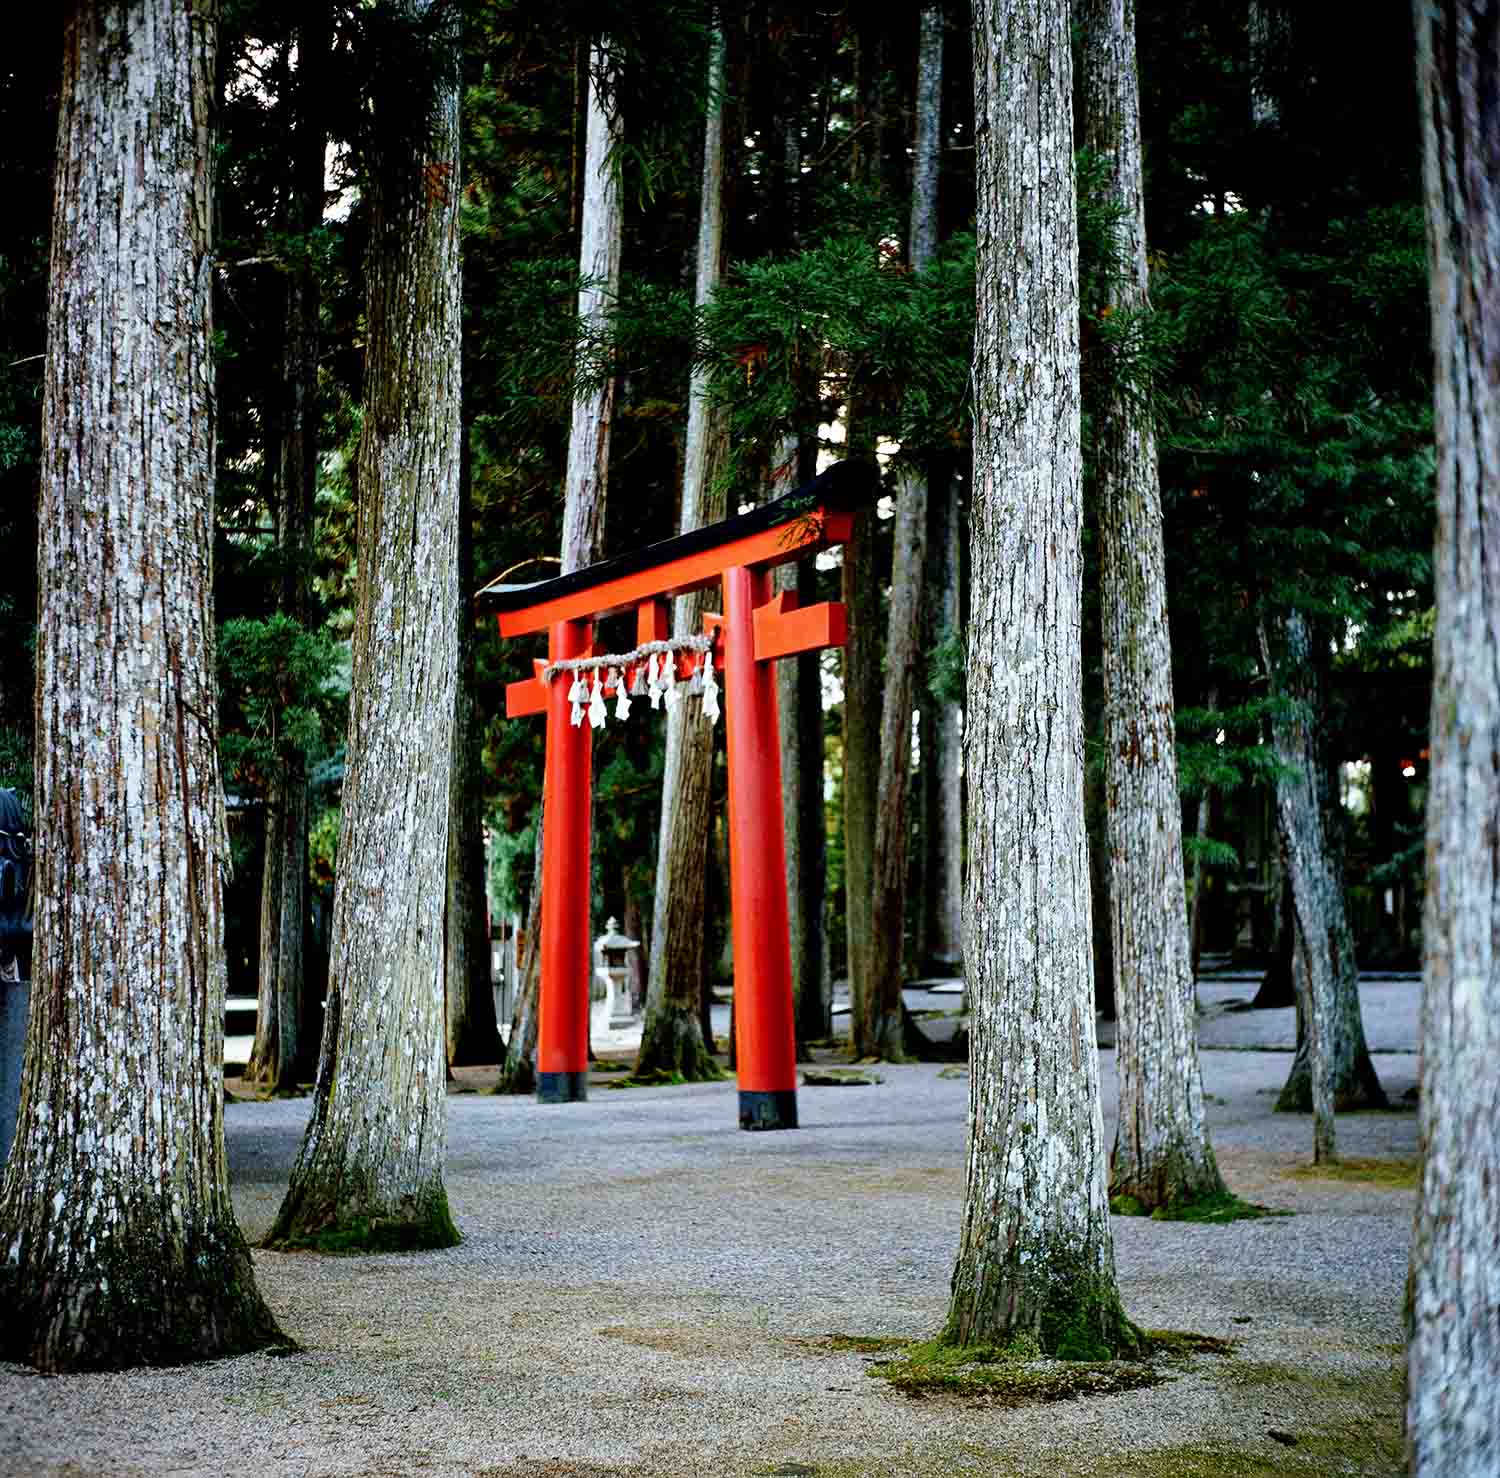 Koyasan temples in the woods and mountains, Japan